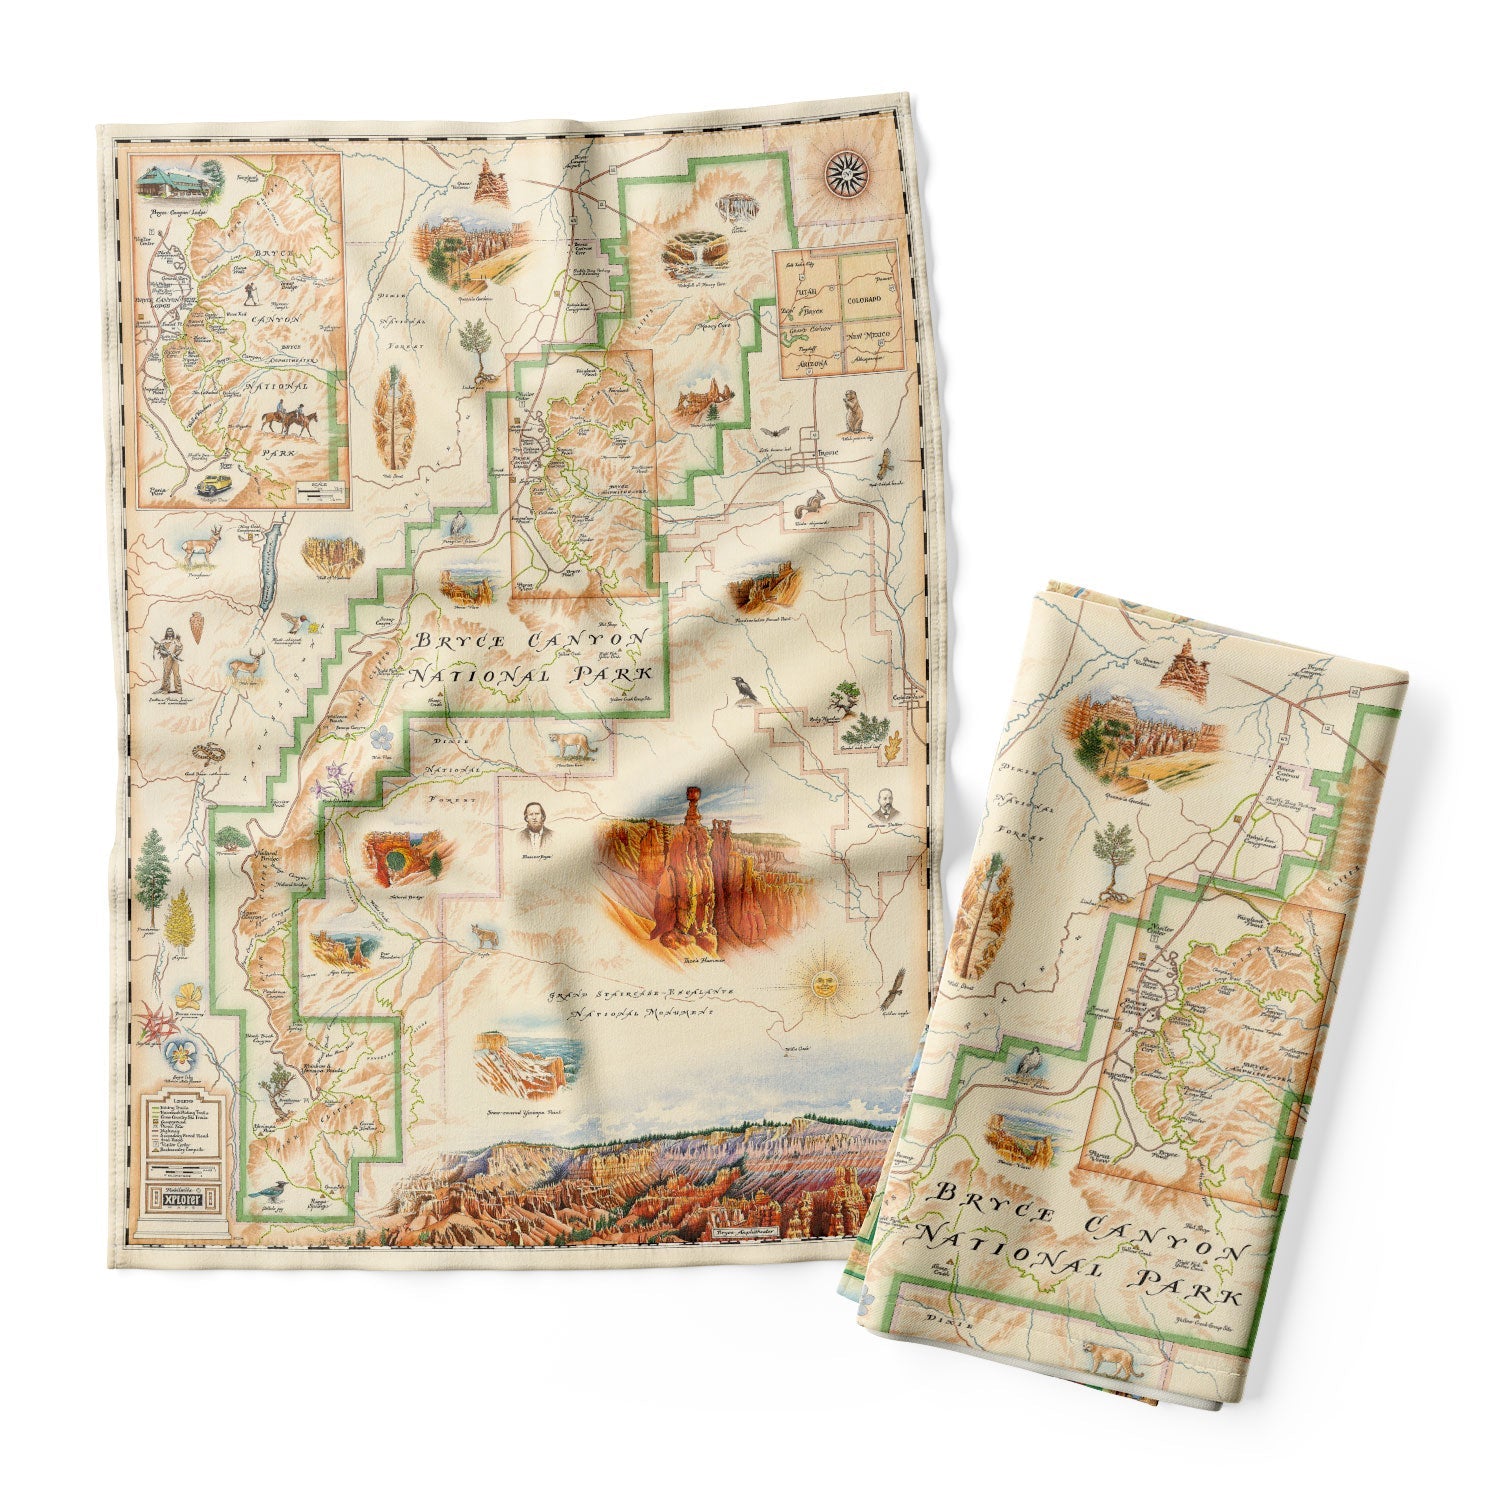 Bryce Canyon National Park Map Kitchen Dish towels on earth tone colors featuring canyons, horseback, hoodoos, Rim Trail, Sunrise Point, Sunset Point, Inspiration Point and Bryce Point.